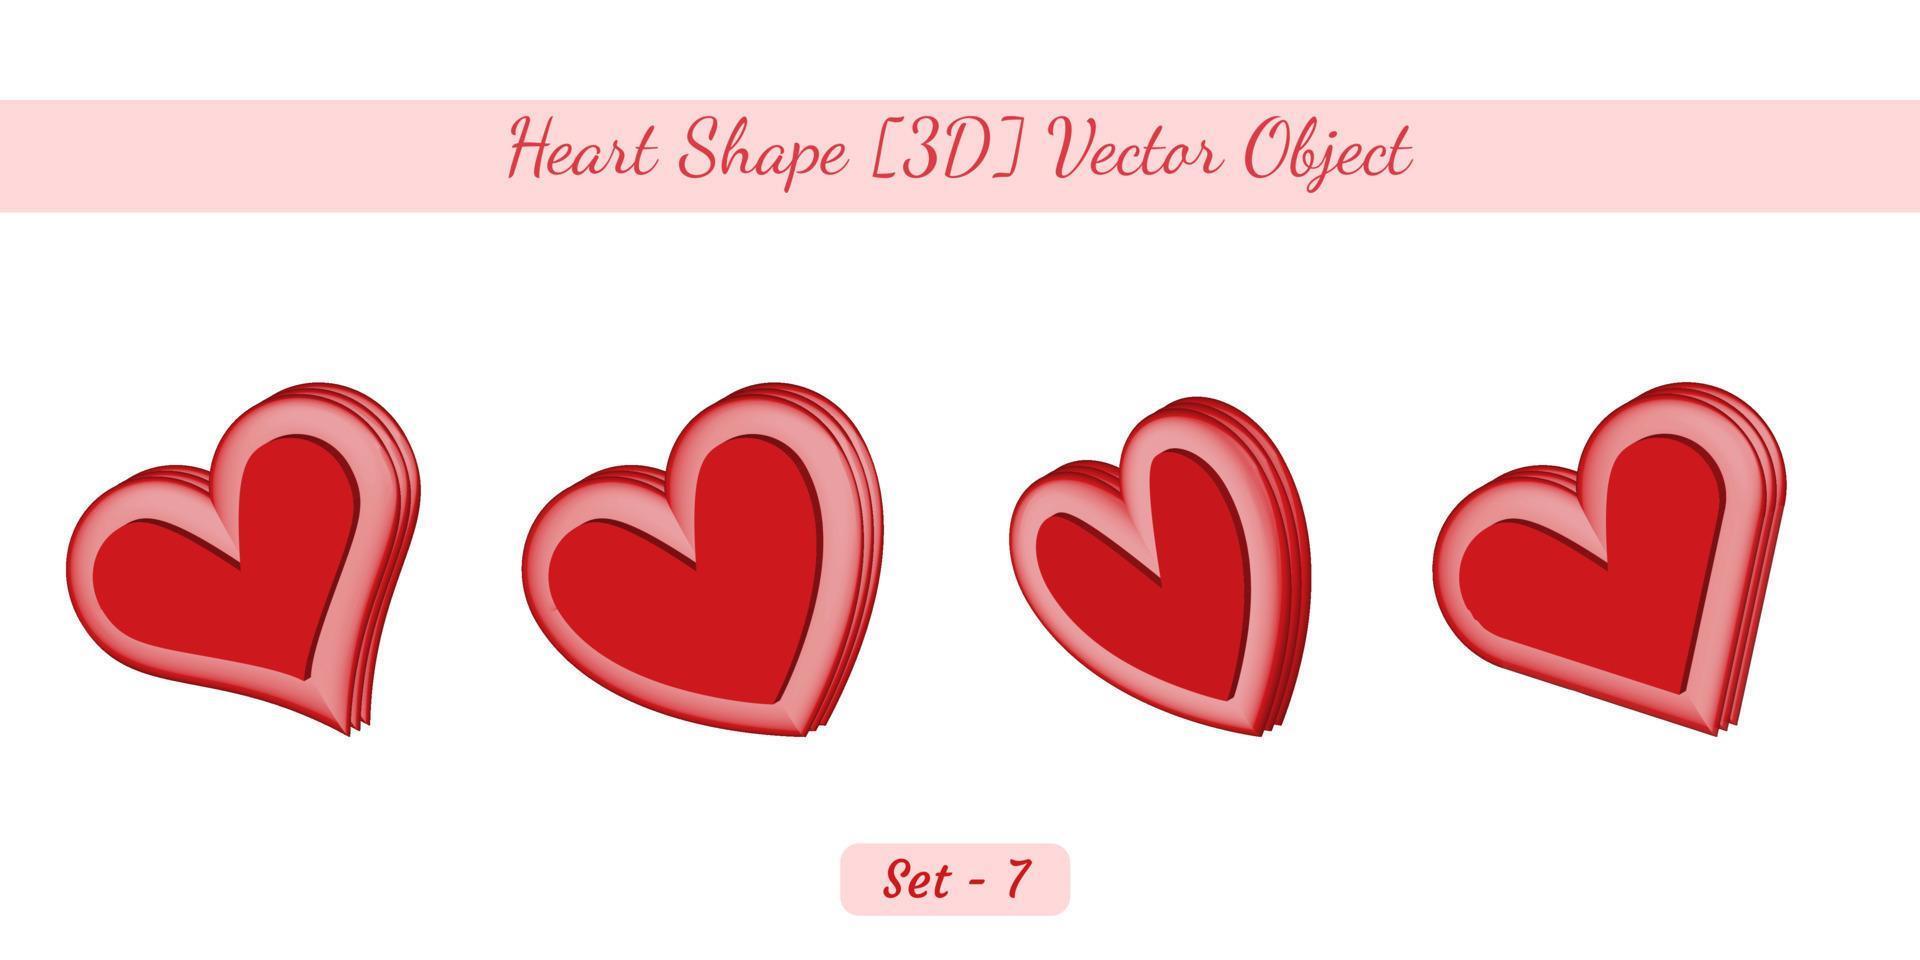 Creative 3d Heart object set, Heart shape vector object set created on white background.